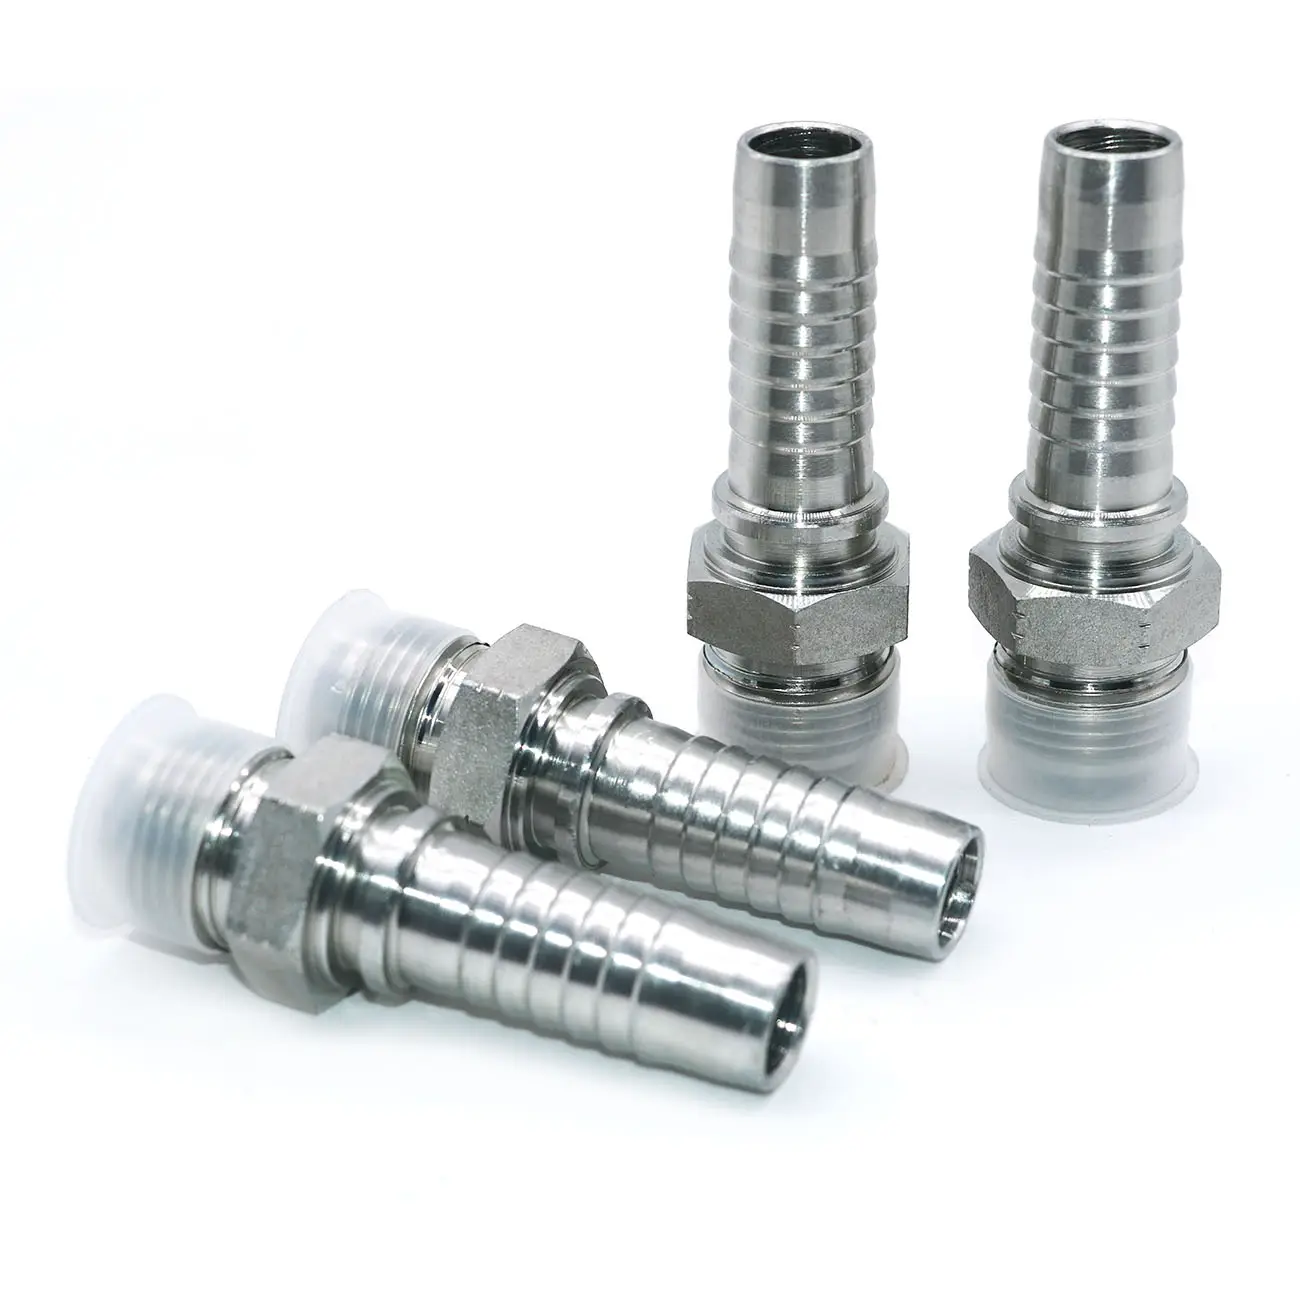 (361) STRAIGHT JIC MALE TYPE 3/4x1.1/16 Hydraulic Hose Nipple Connector Reducing Pipe Fittings